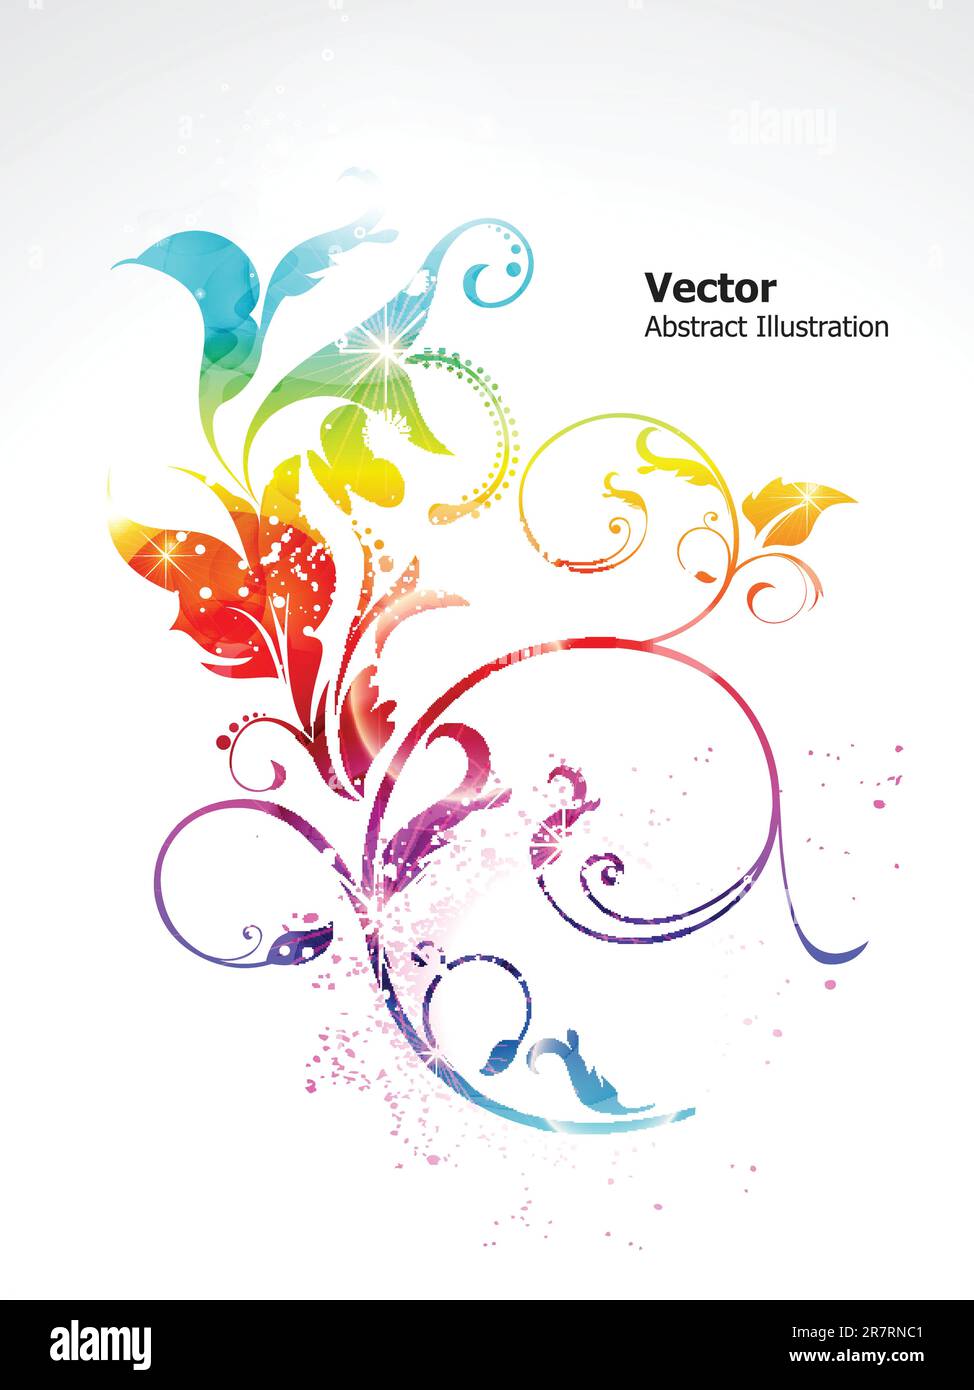 abstract colorful shiny rainbow floral vector illustration Stock Vector